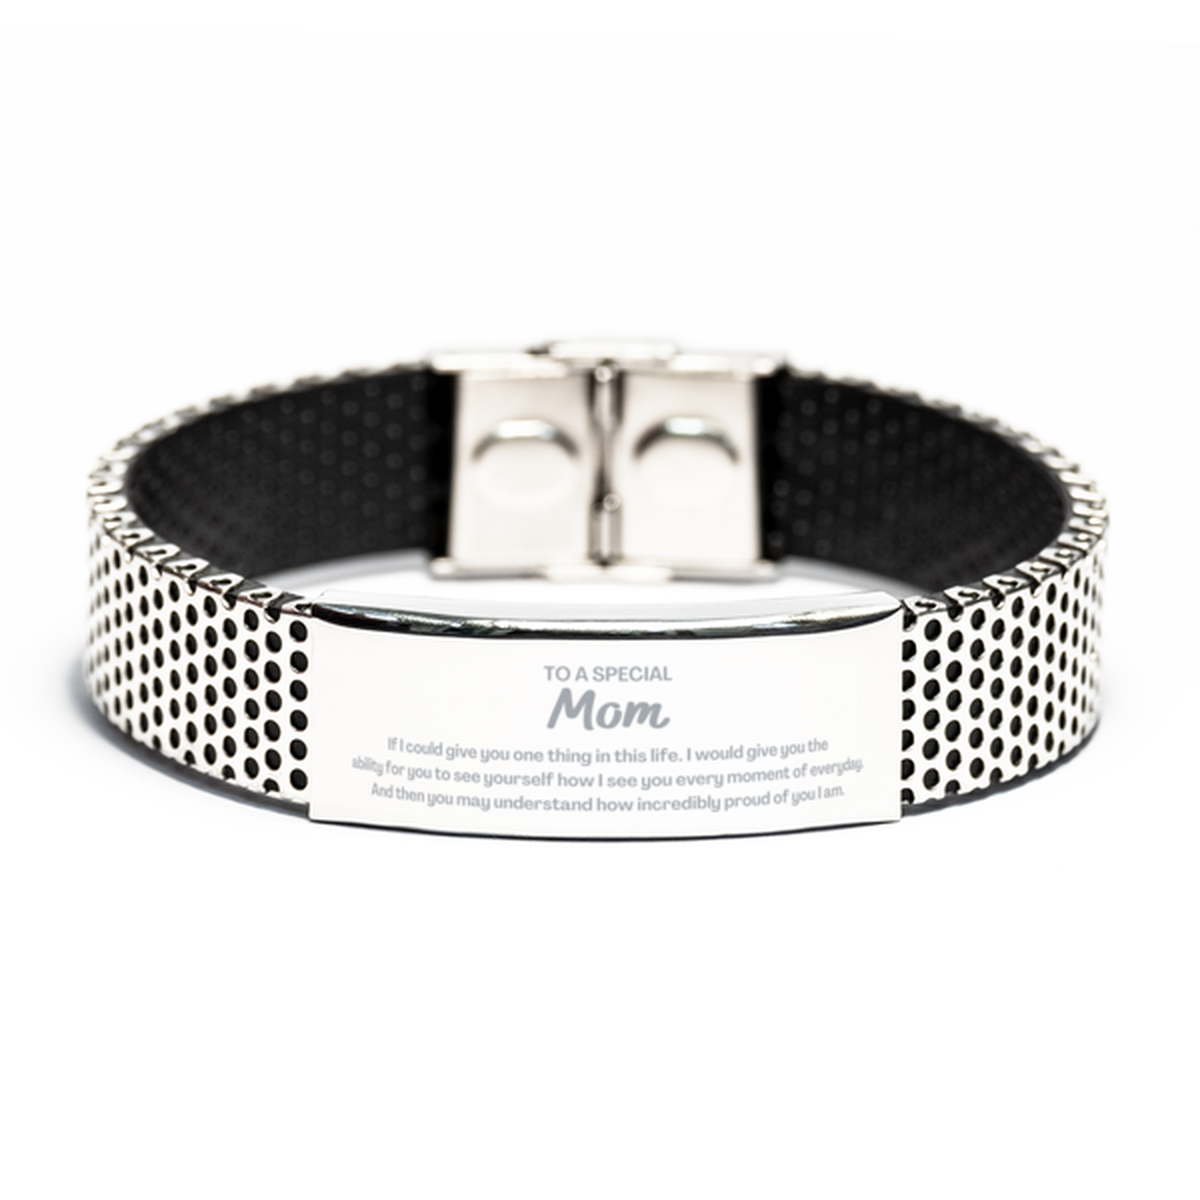 To My Mom Stainless Steel Bracelet, Gifts For Mom Engraved, Inspirational Gifts for Christmas Birthday, Epic Gifts for Mom To A Special Mom how incredibly proud of you I am